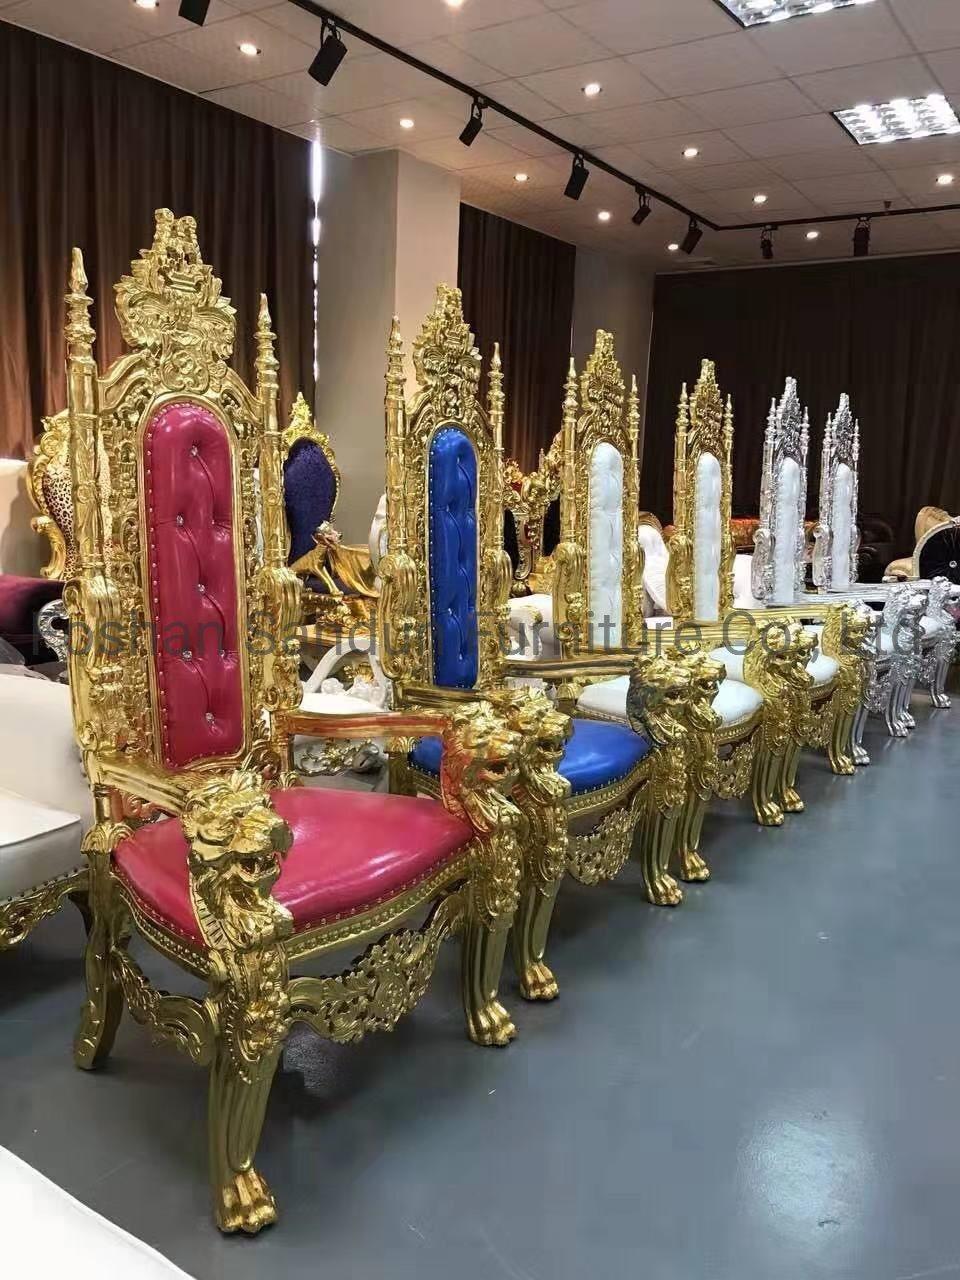 Cheap Price Customization Available Solid Wood Wedding Event Throne Sofa